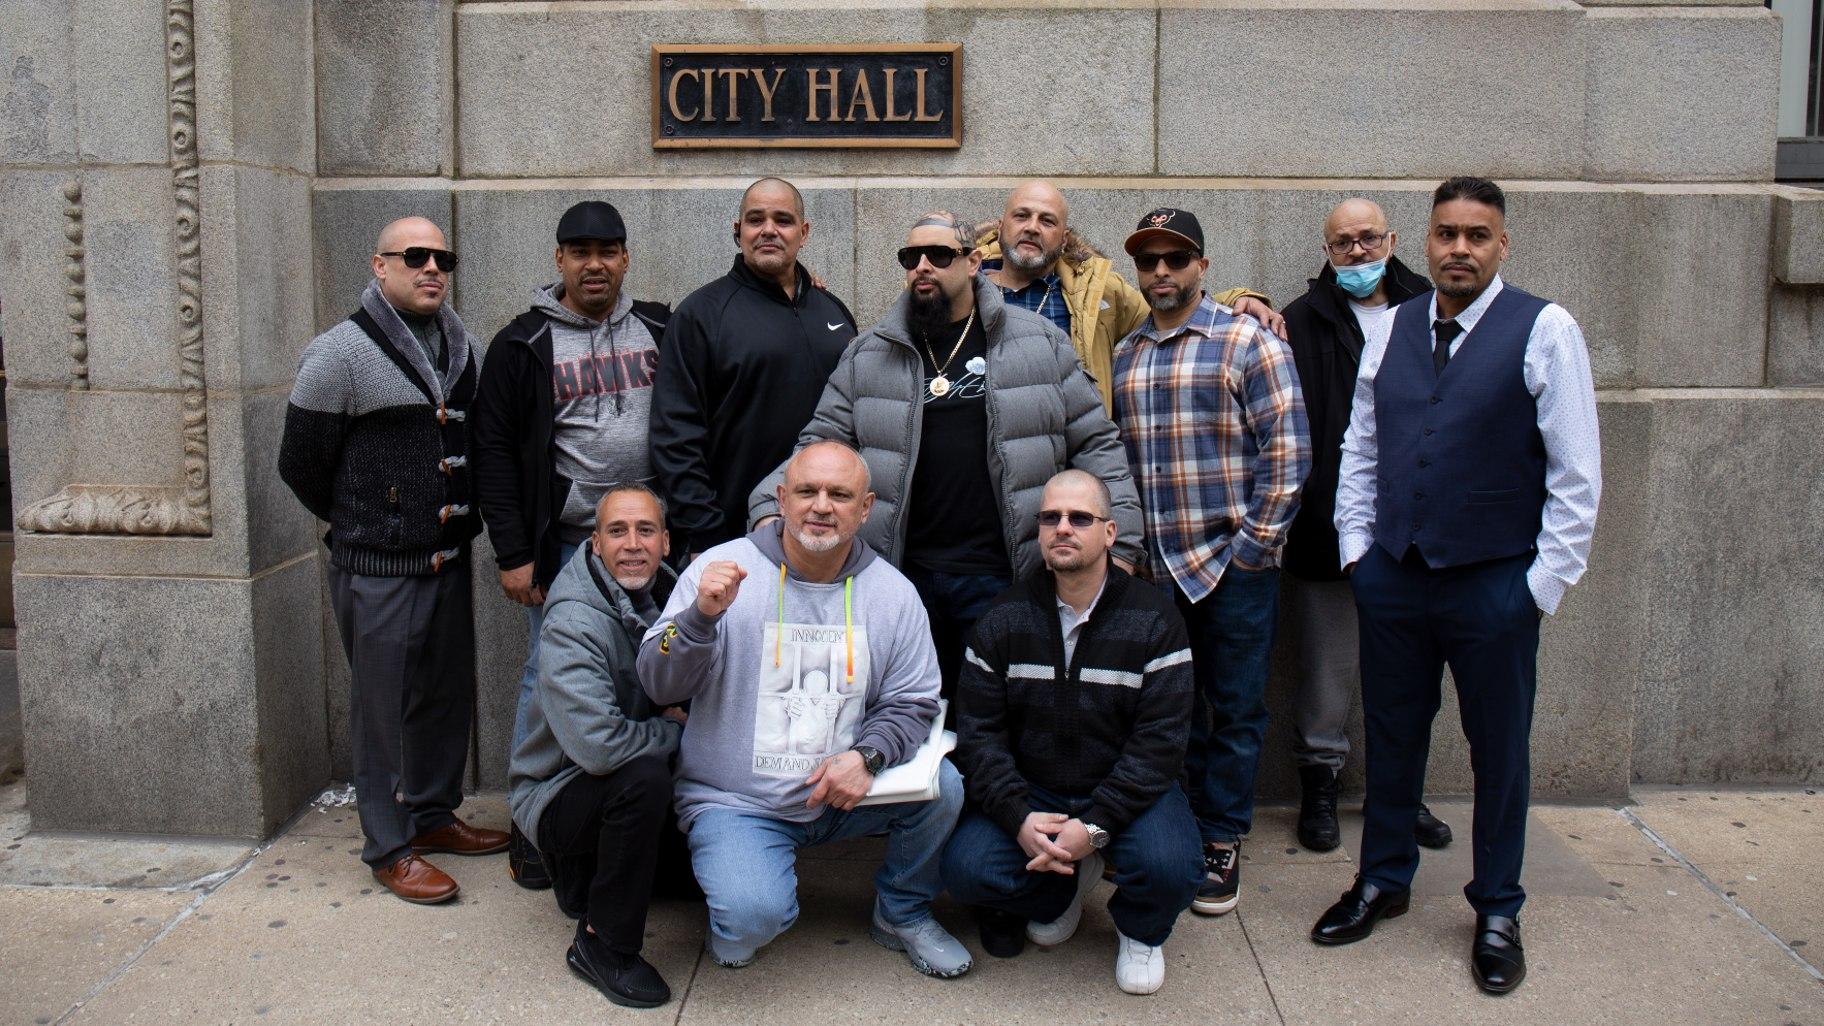 In March 2023, 11 wrongfully convicted men filed a lawsuit against former Chicago Police Detective Reynaldo Guevara, the city of Chicago and other officers. (Courtesy of Matt Thibodeau / Loevy and Loevy)